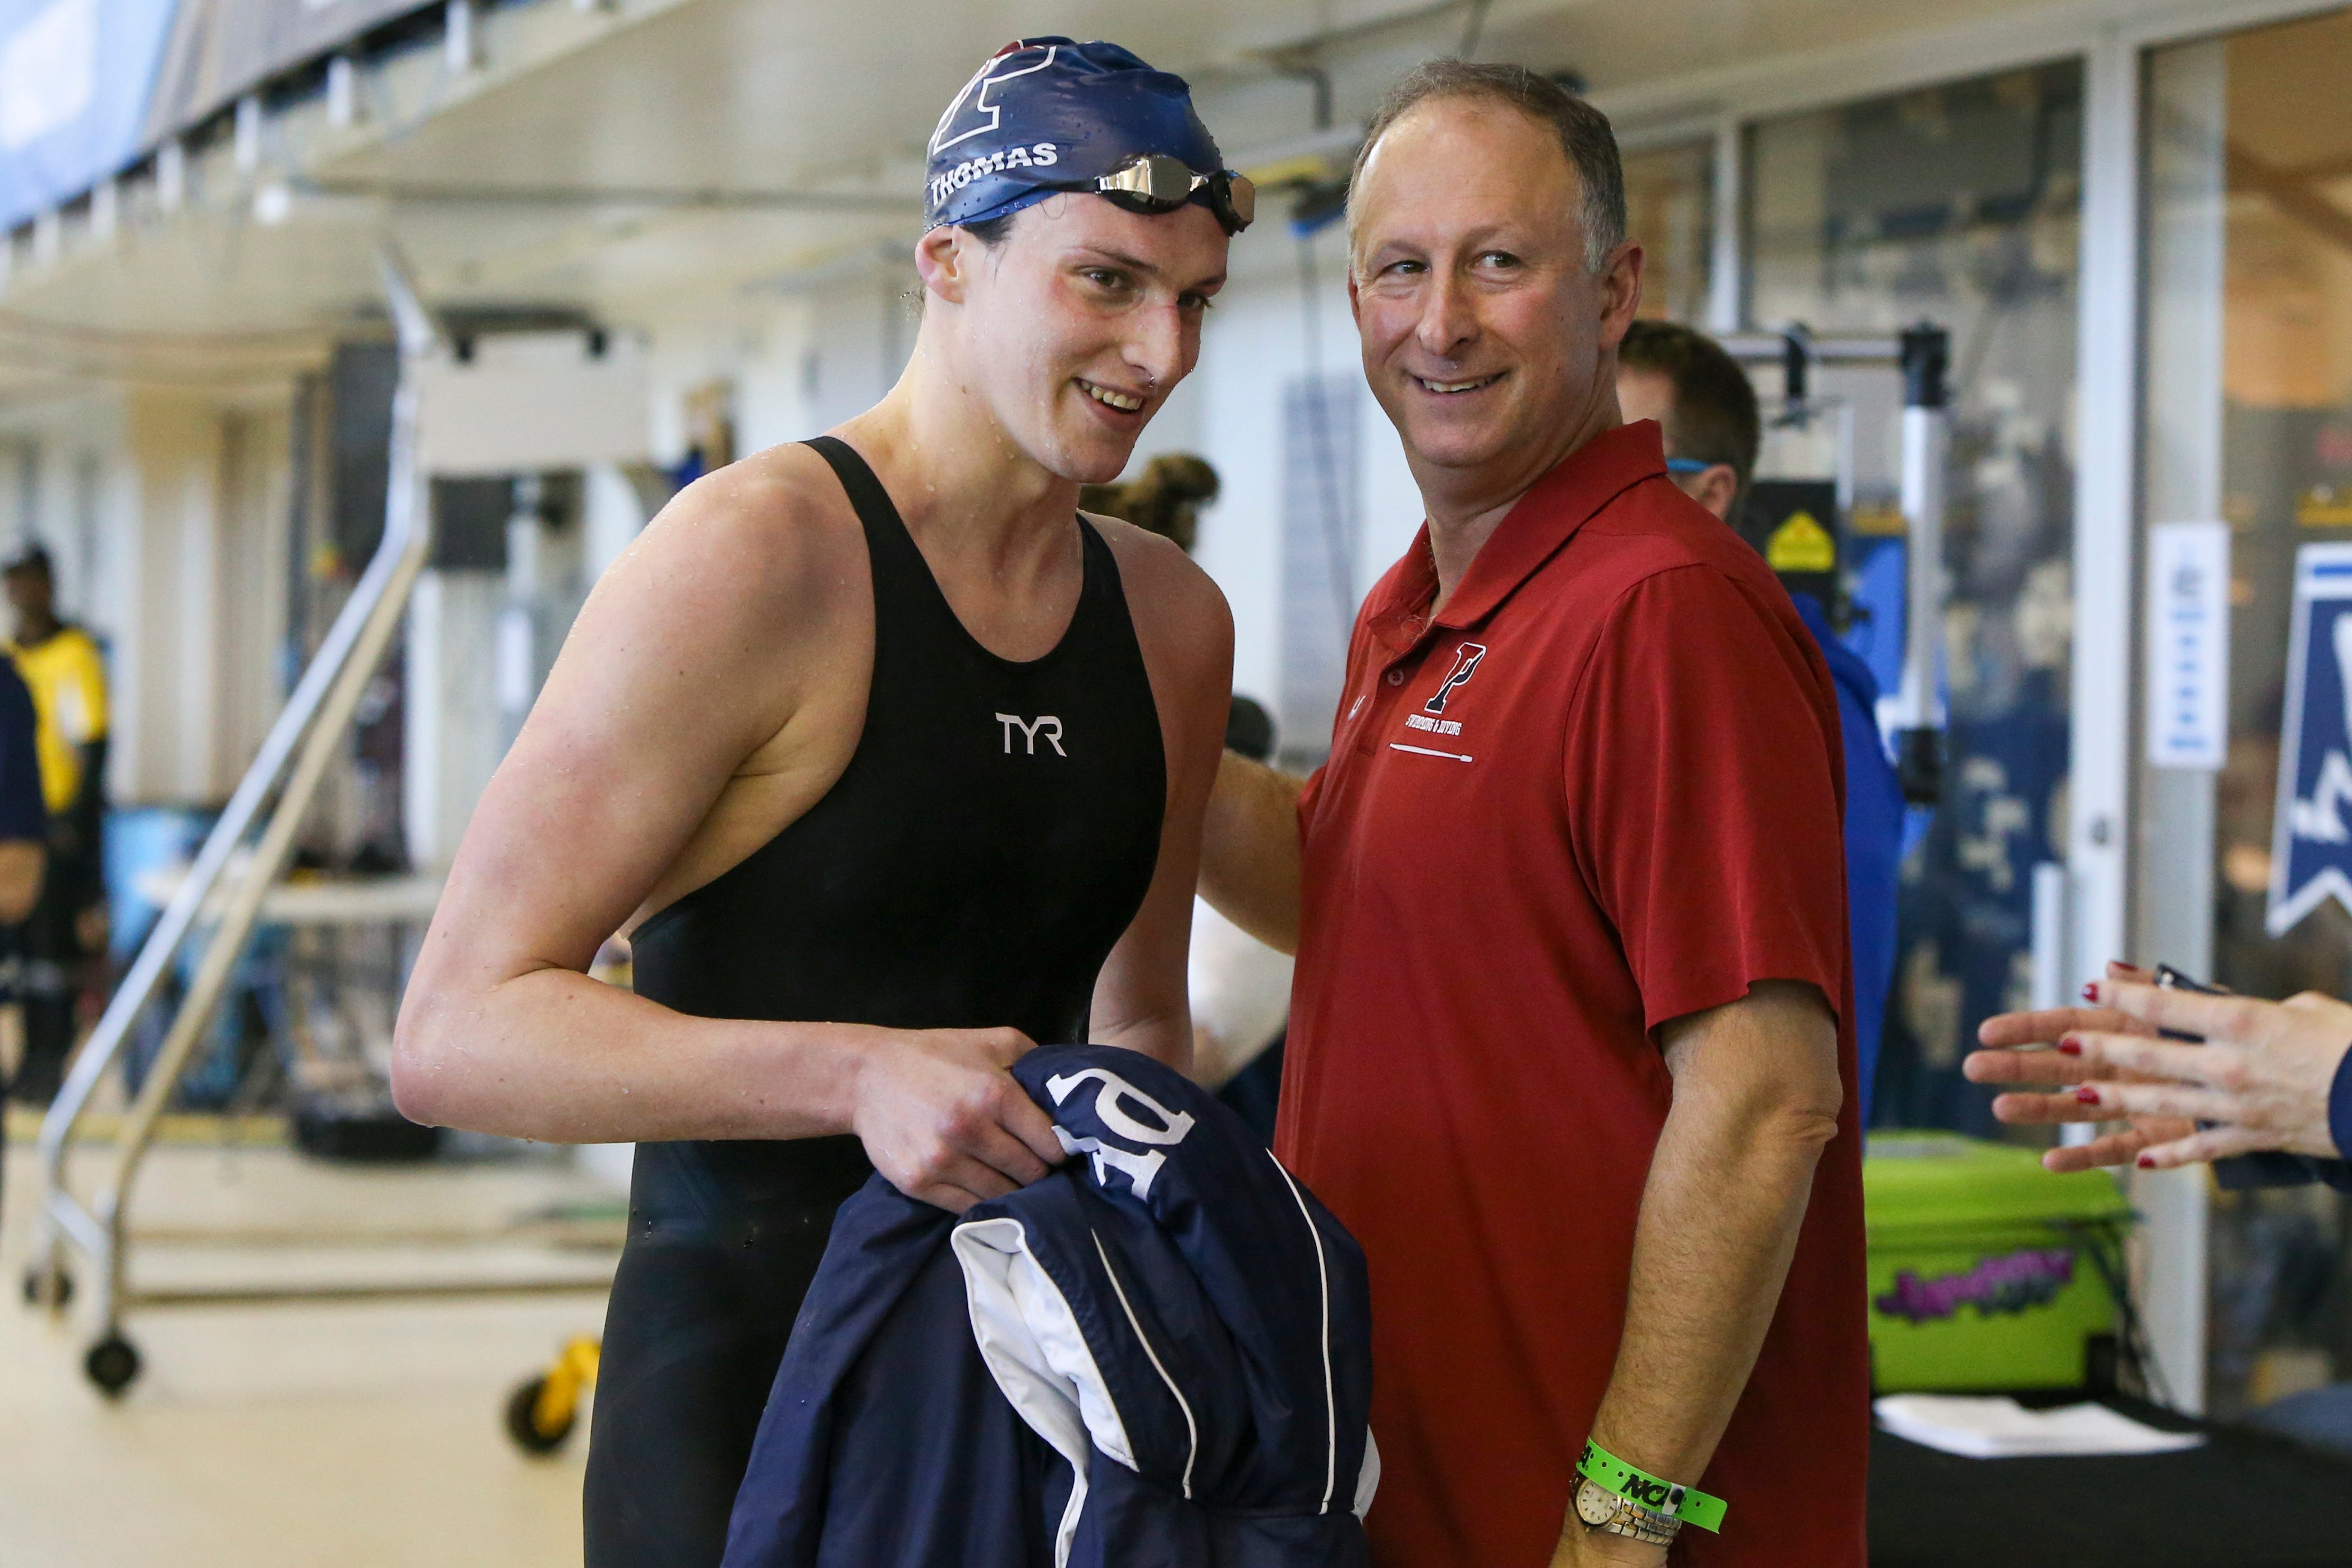 Trans swimmer Lia Thomas finishes fifth in bid for second NCAA